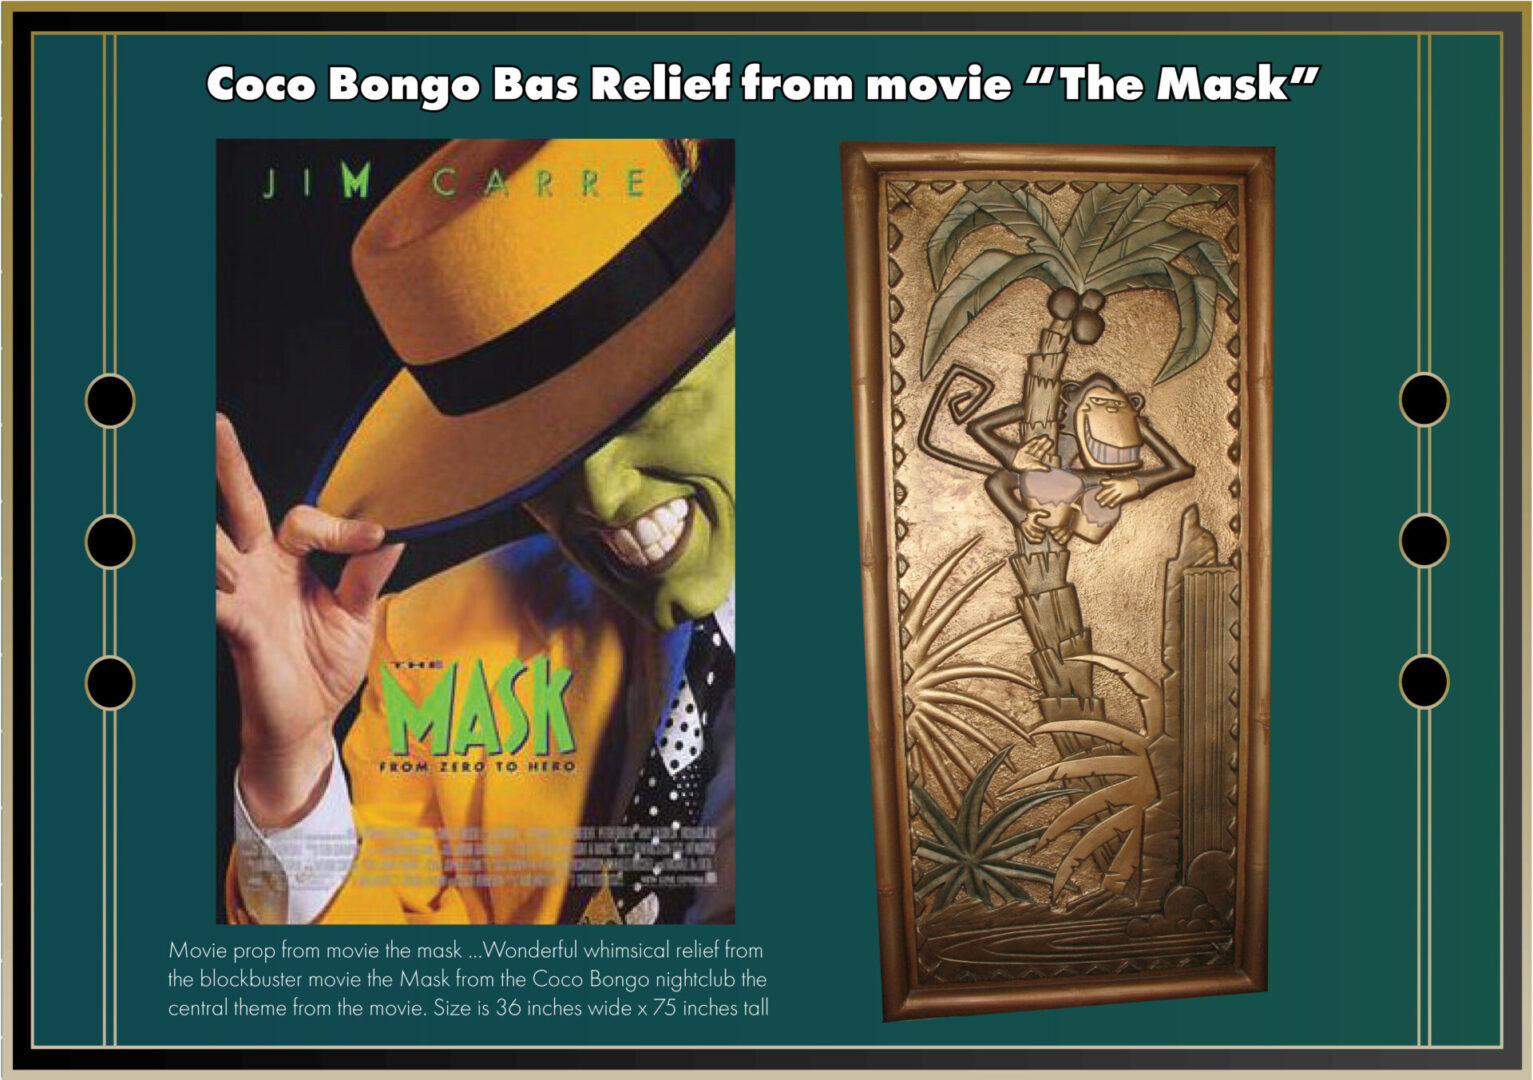 Coco Bongo Bas Relief inspired from the movie The Mask